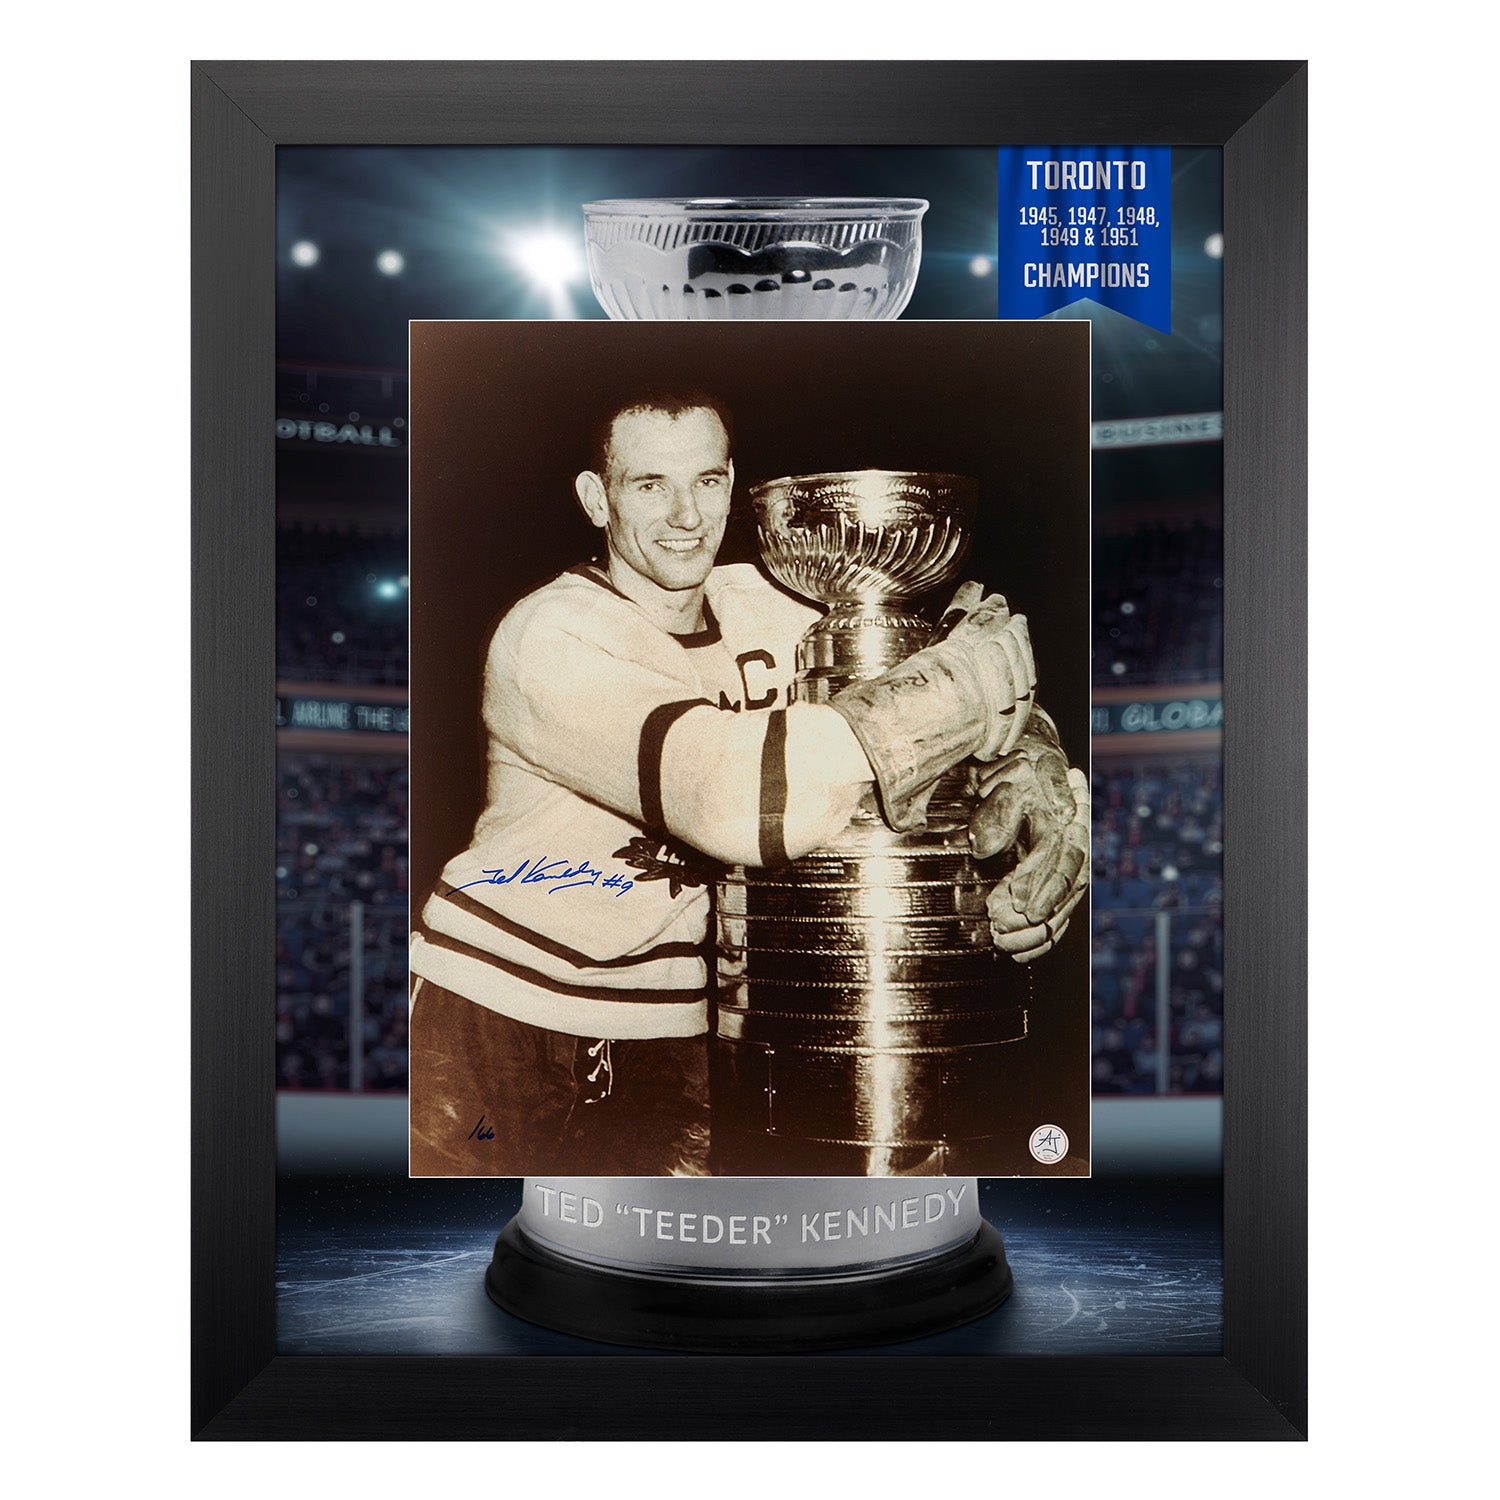 Ted Kennedy Signed Toronto Maple Leafs Champion Cup Graphic 26x32 Frame